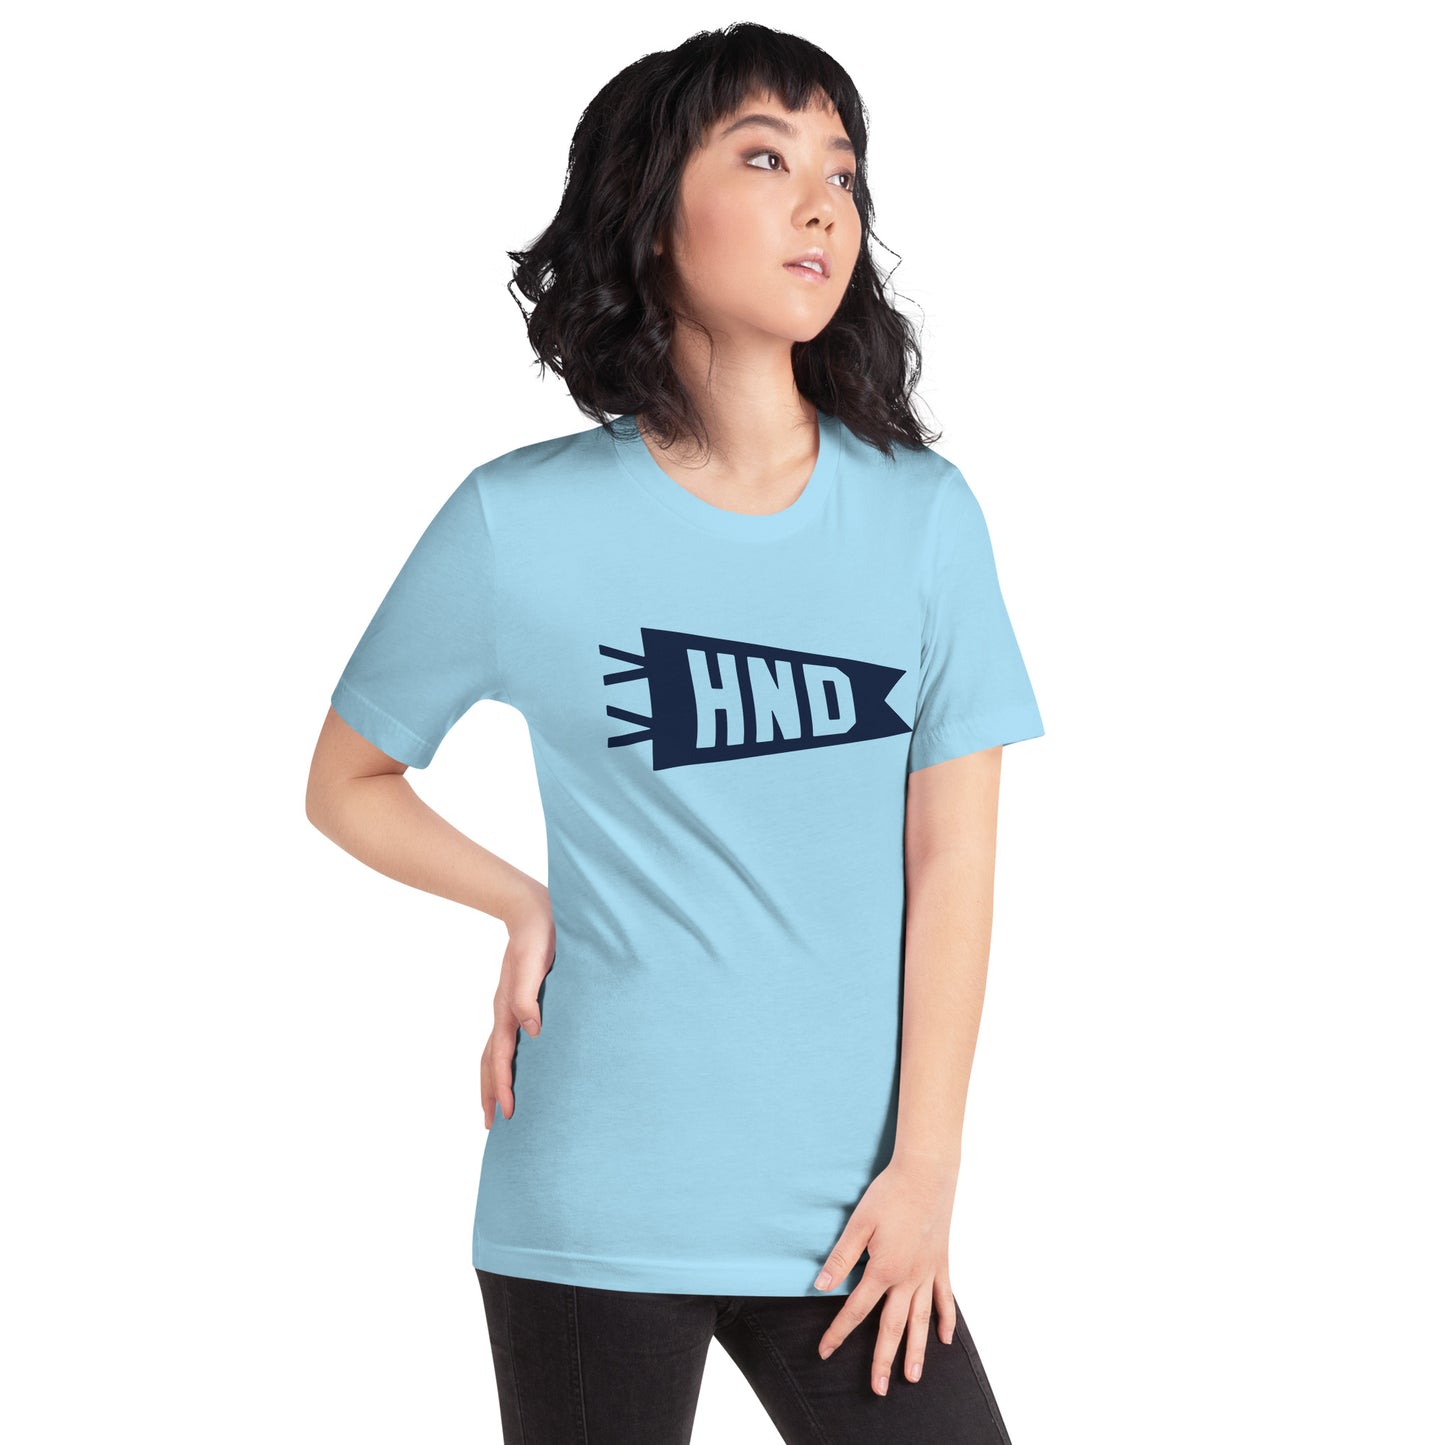 Airport Code T-Shirt - Navy Blue Graphic • HND Tokyo • YHM Designs - Image 07